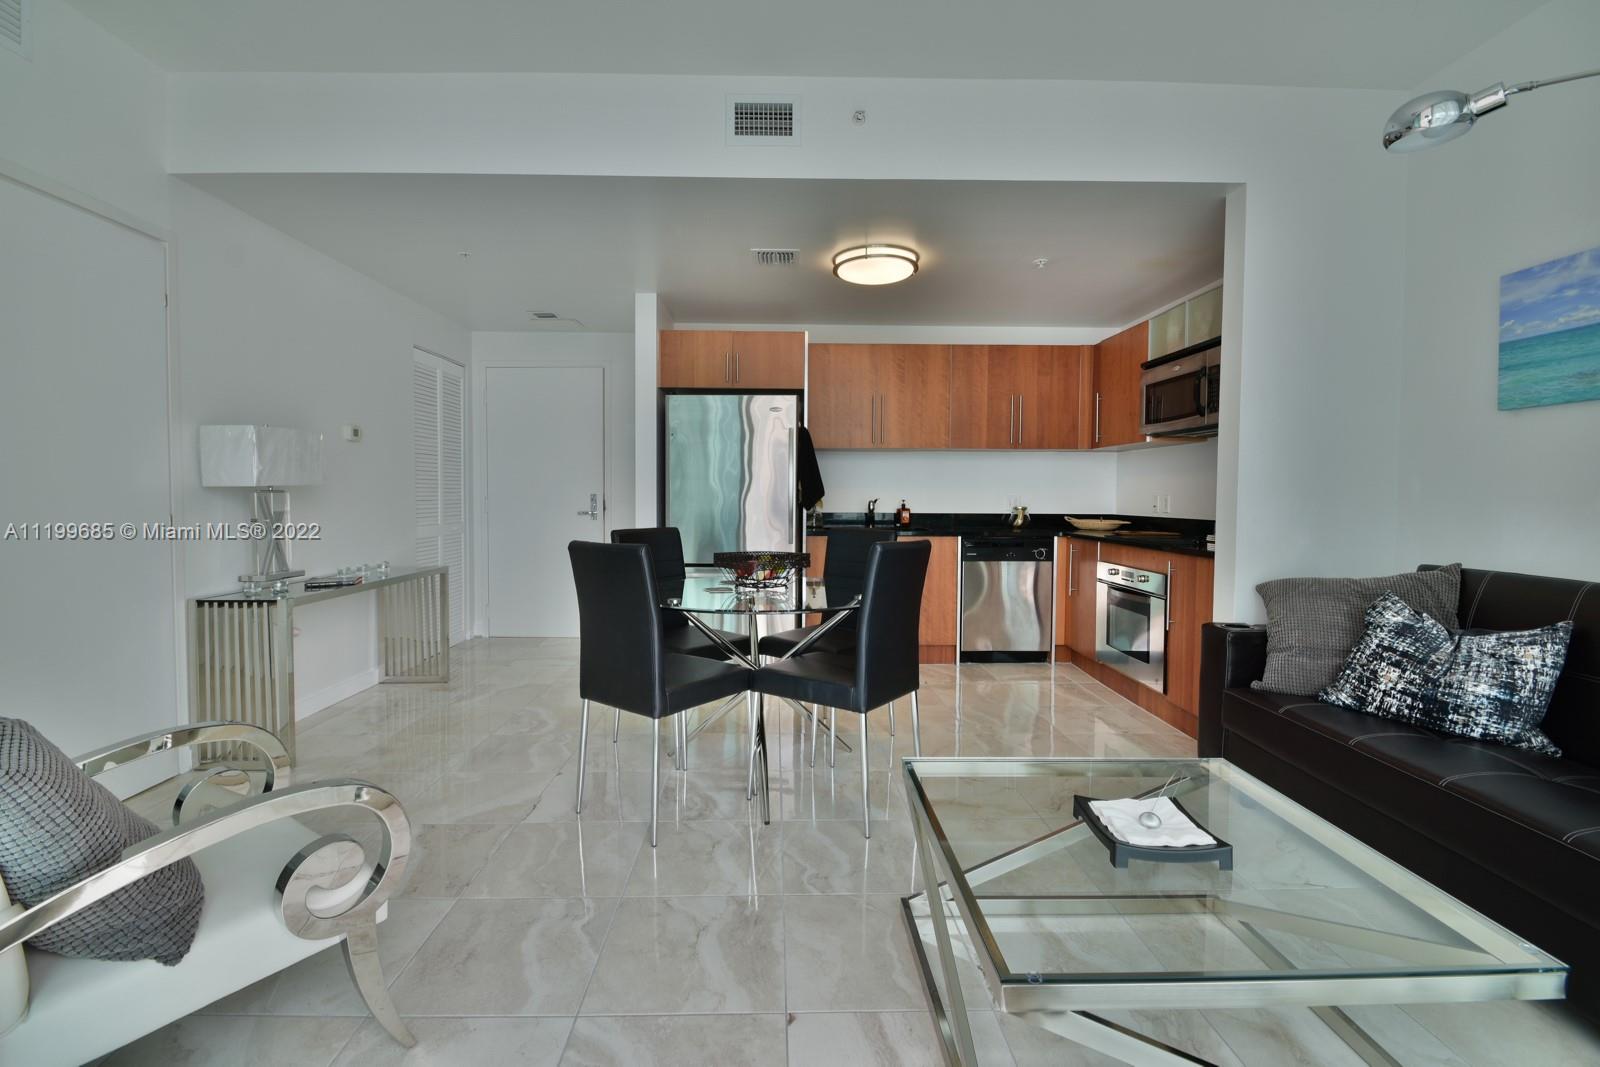 Beautiful condo with modern style furniture at The Met 1 building in Downtown Miami. This bright and clean
condo comes with ceramic floors, SS appliances & granite counter tops. Met 1 is located within walking distance from Brickell, Bayside & Arts District, Miami arena, Wholefoods, Restaurants, Downtown Shopping, etc. Public
transportation also makes it easy to move around. Building comes with two lobbies, business center, gym, pool,
social room w/pool table, library, 24h doorman & 24h valet service. Responsible European landlords.